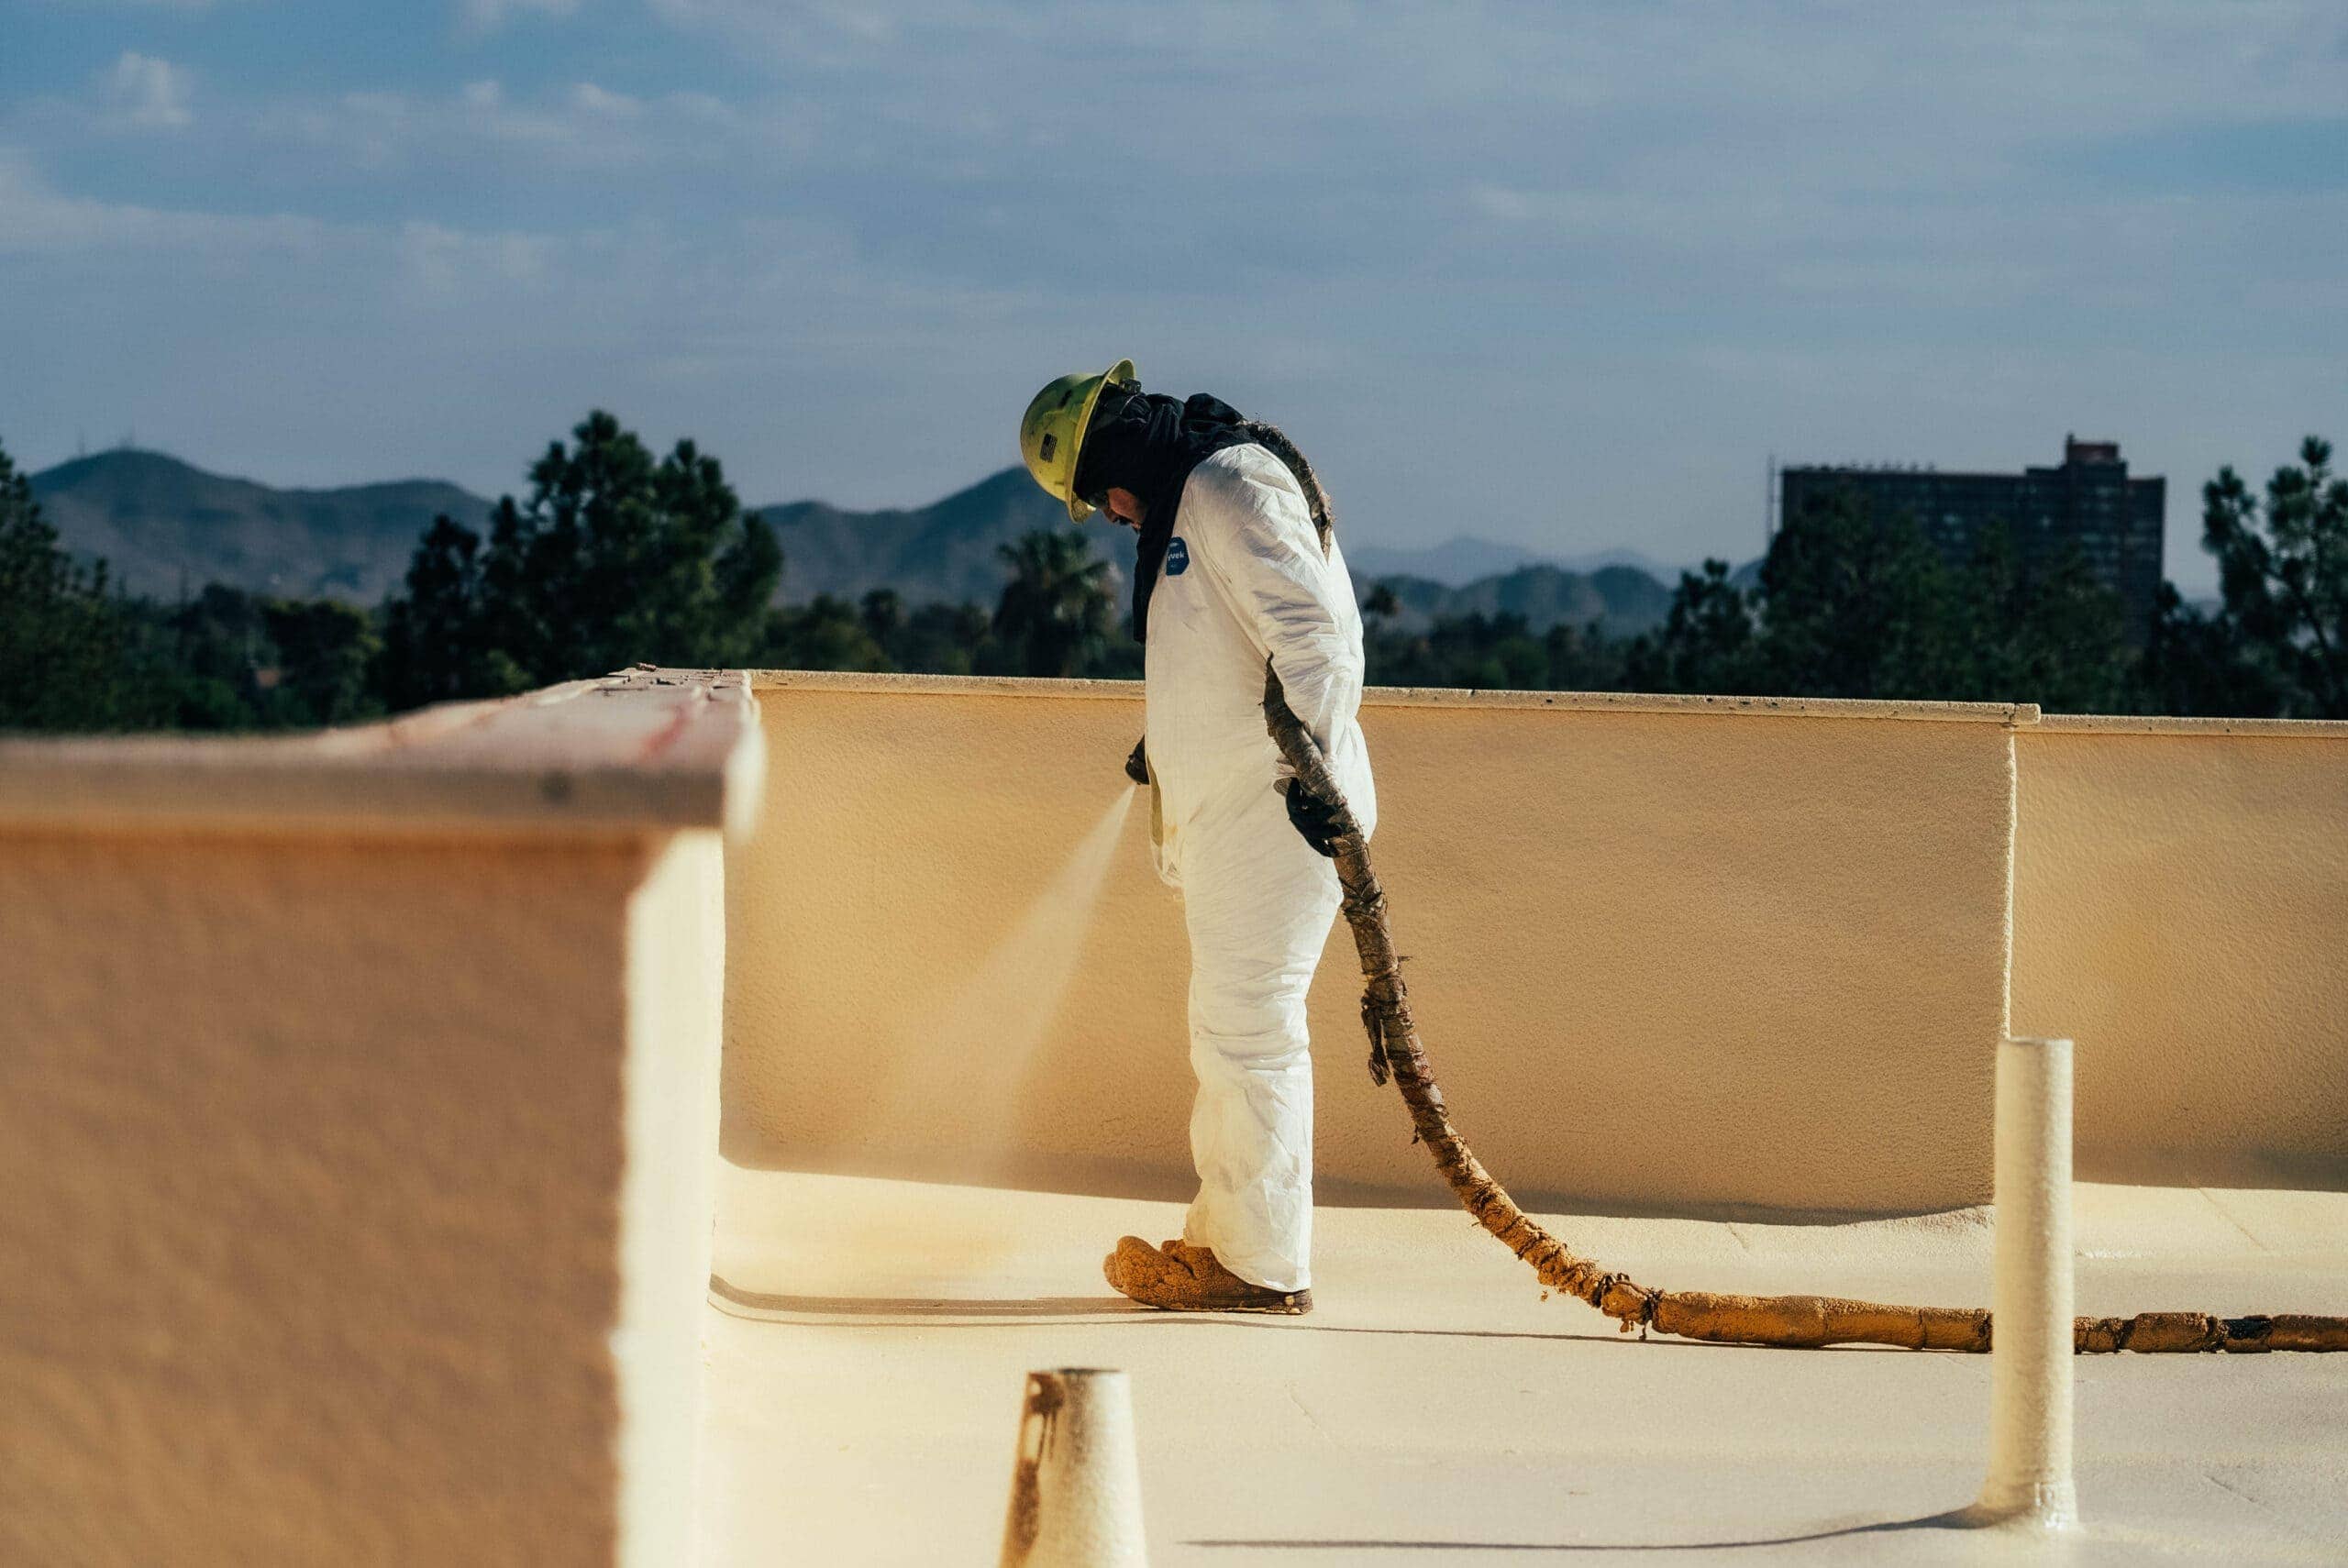 Expert applying protective spray foam coating on a roof in the Biltmore area, under the vast Arizona sky.